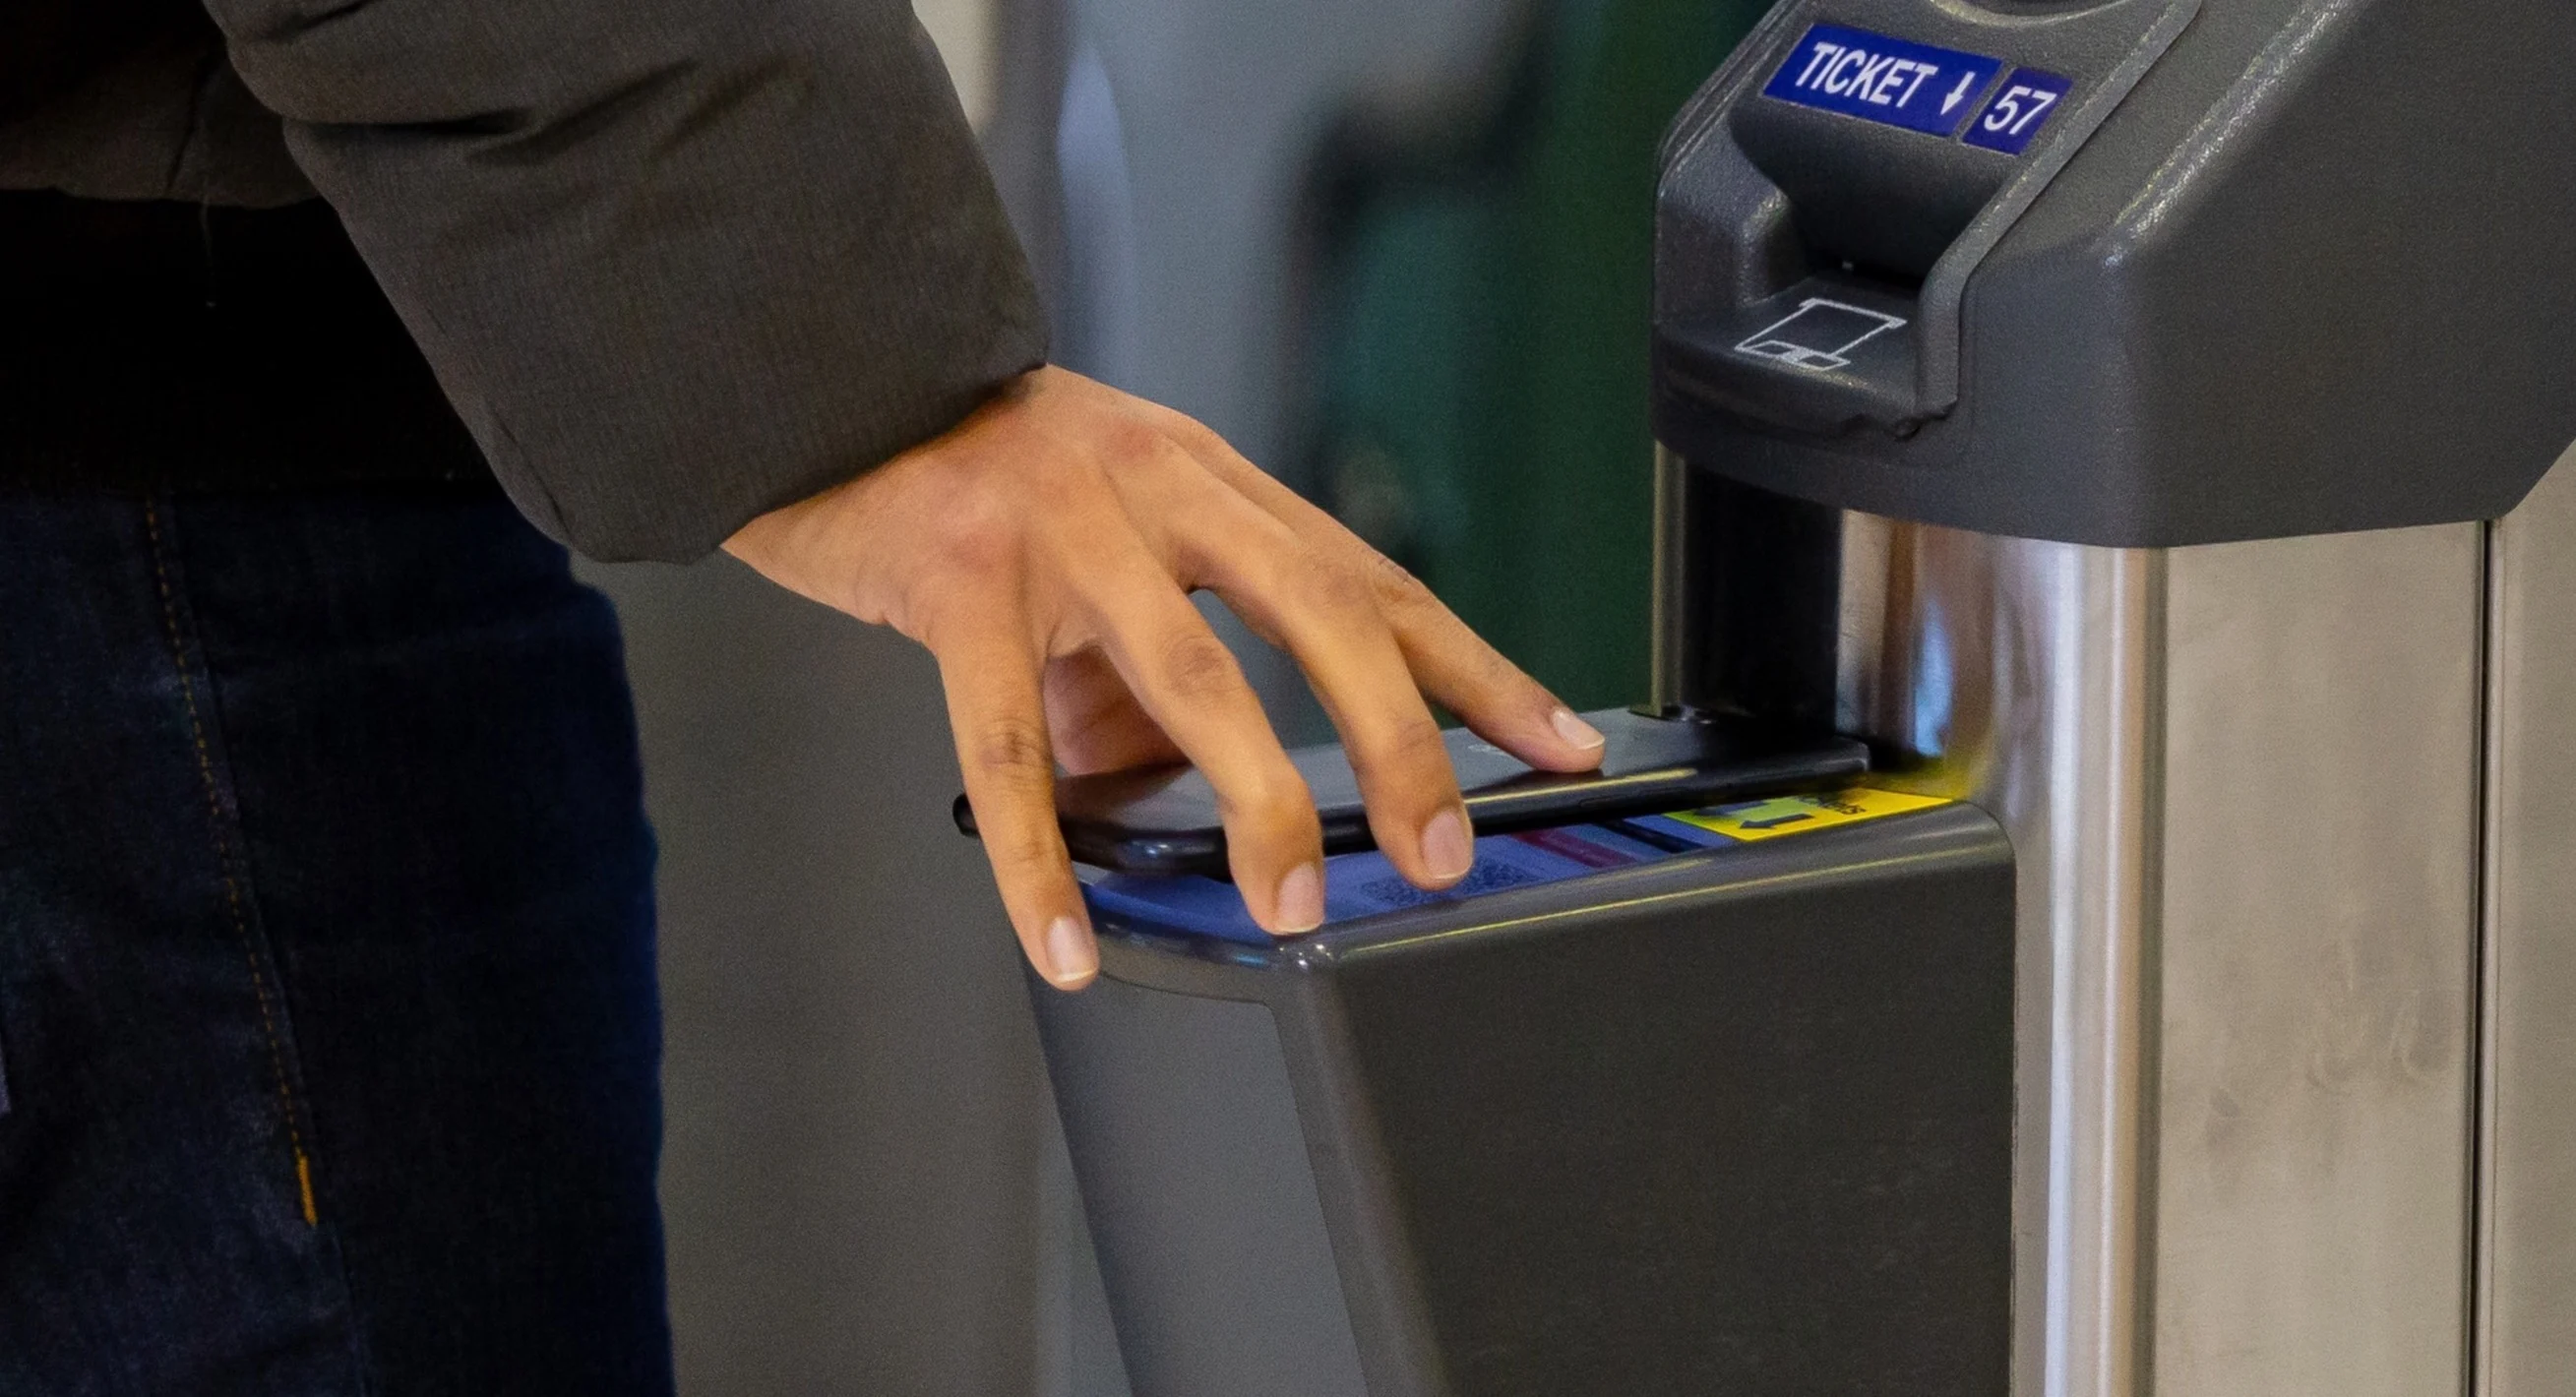 A hand scanning a smart ticket on a mobile phone at a National Rail station ticket barrier